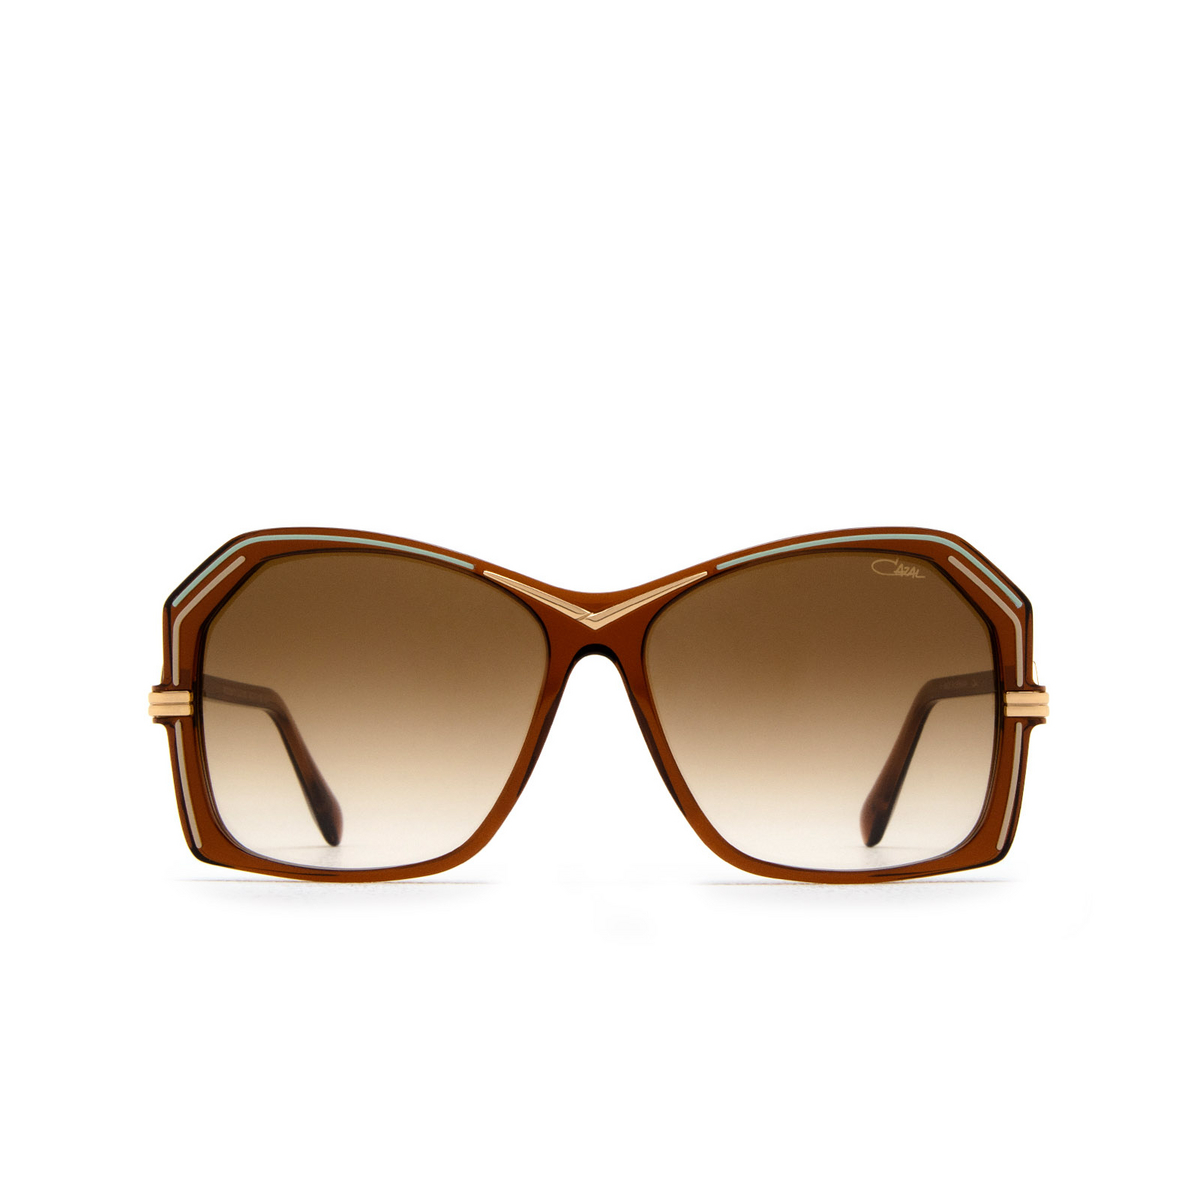 Cazal 8510 Sunglasses 002 Brown - Turquoise - front view